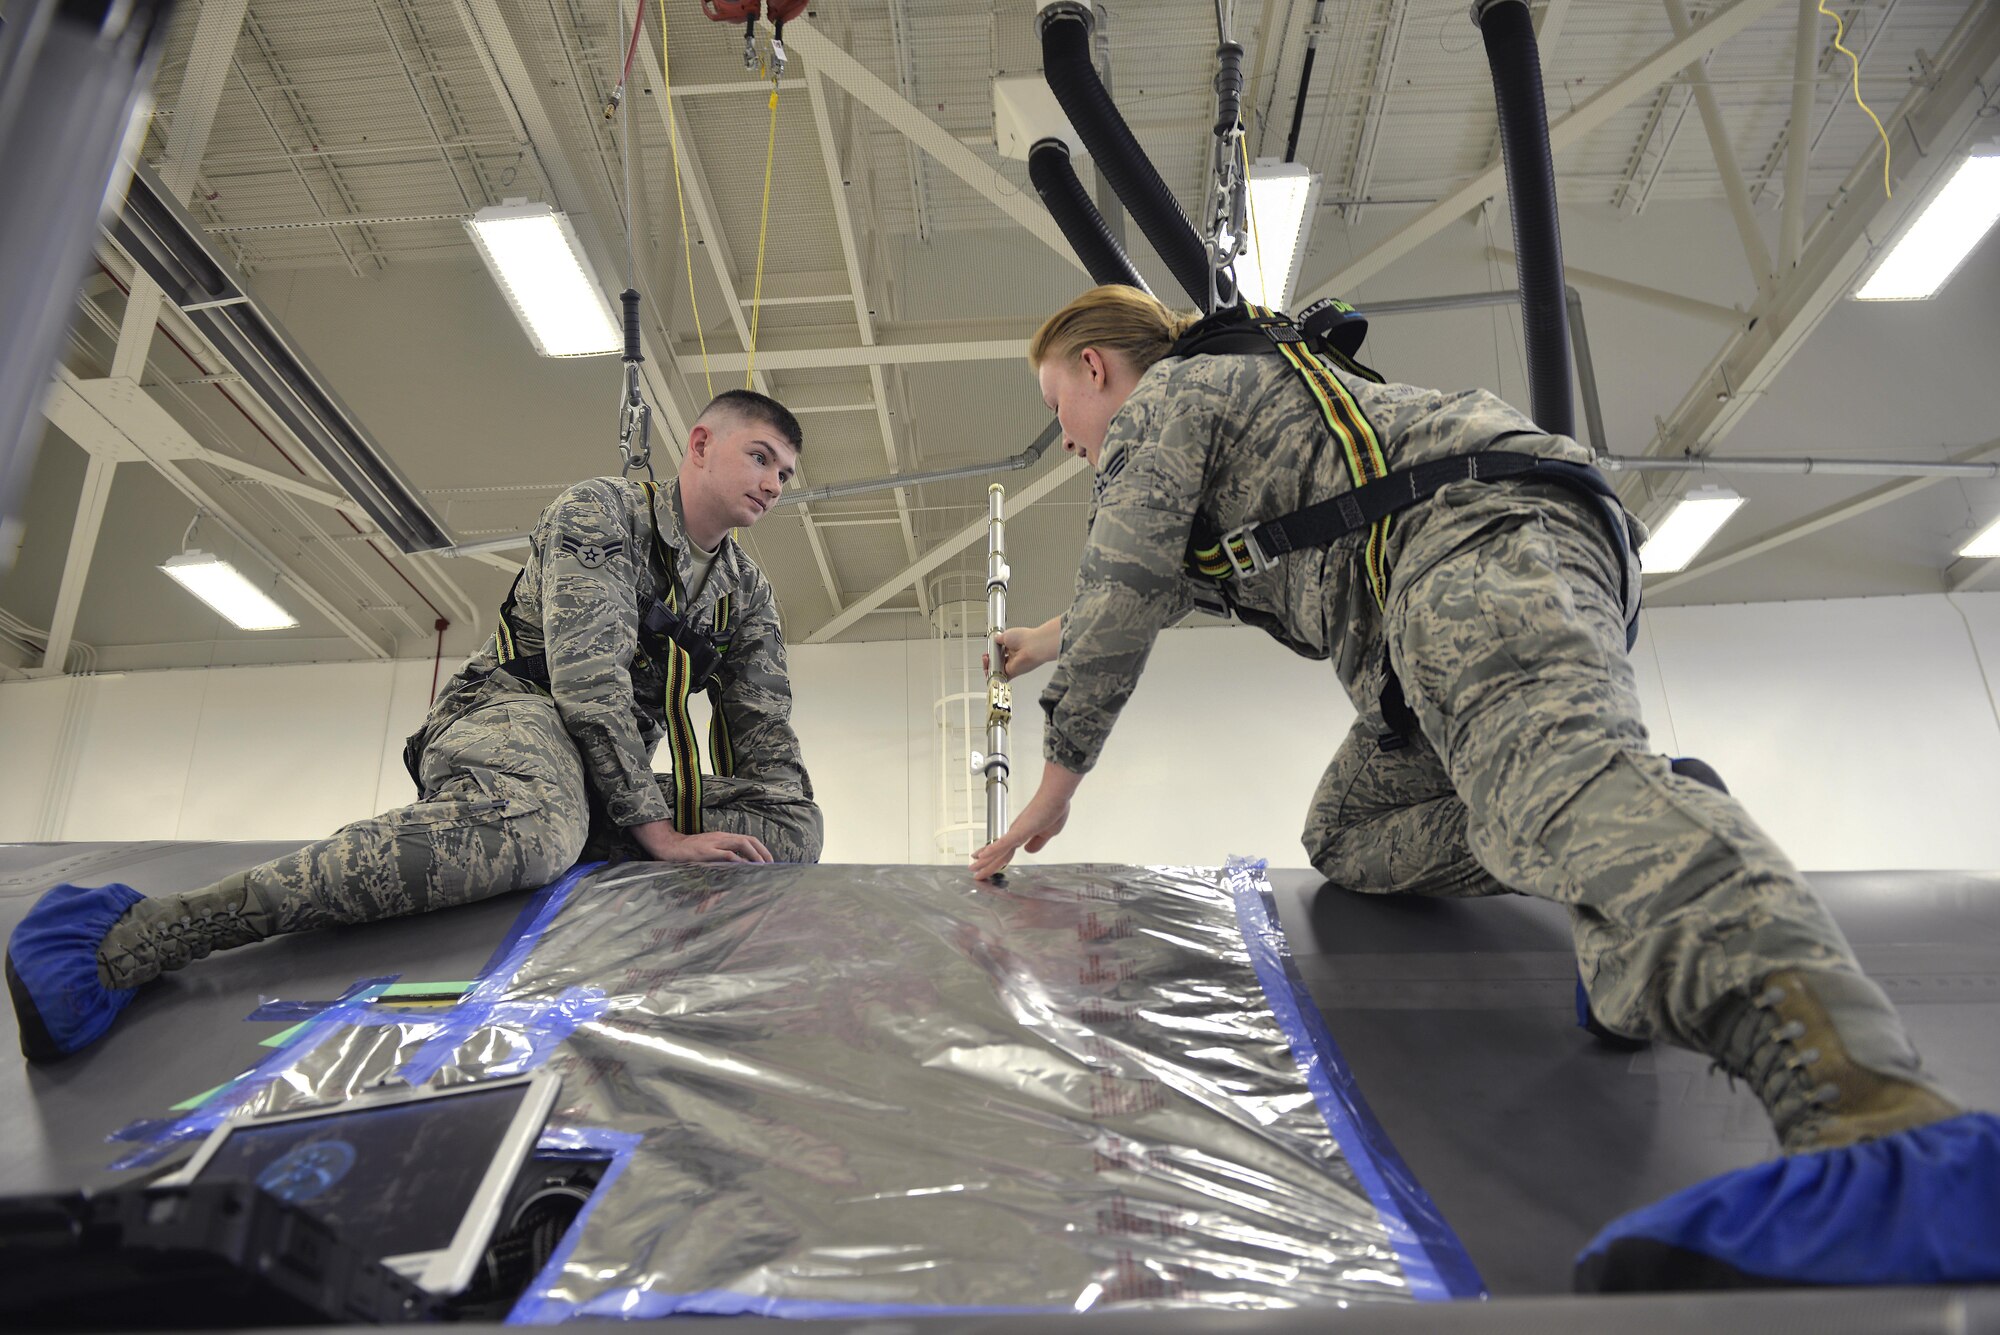 (Right) Airman Samantha Schmedeke, 33rd Maintenance Squadron fuel systems journeyman, demonstrates the proper use of a probe to (Left) Airman 1st Class William Manion, 33rd MXS fuel systems apprentice, at Eglin Air Force Base, Fla., May 16, 2016.  The probe is used to check the fuel levels of an F-35A Lightning II after flight. (U.S. Air Force photo/Senior Airman Andrea Posey)